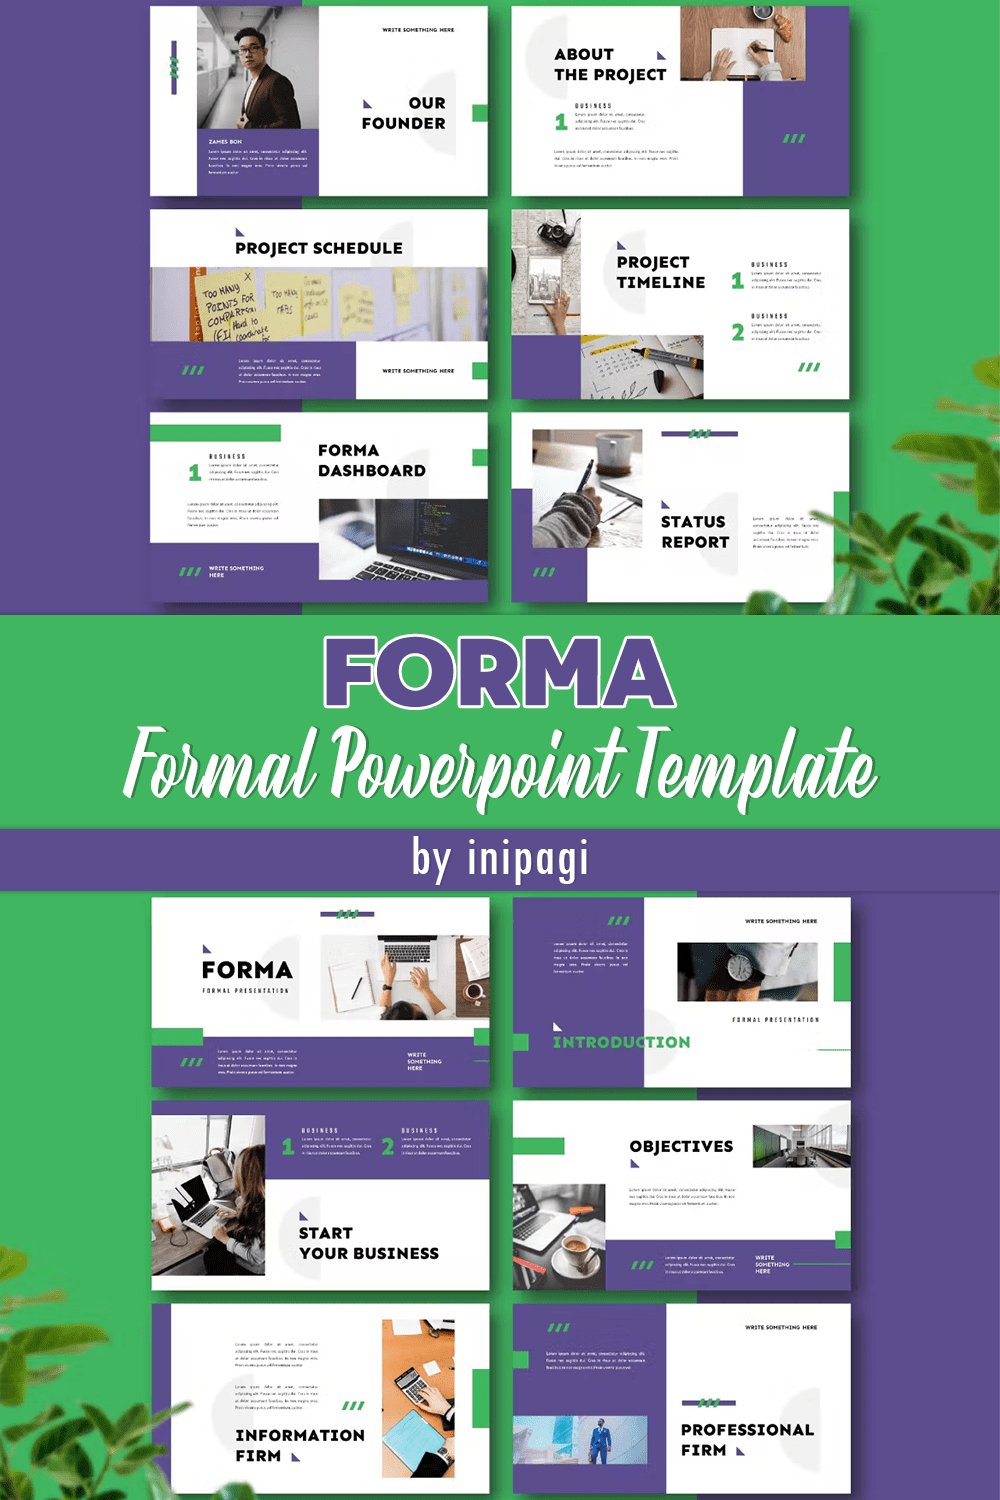 Forma - Formal Powerpoint Template - Pinterest.